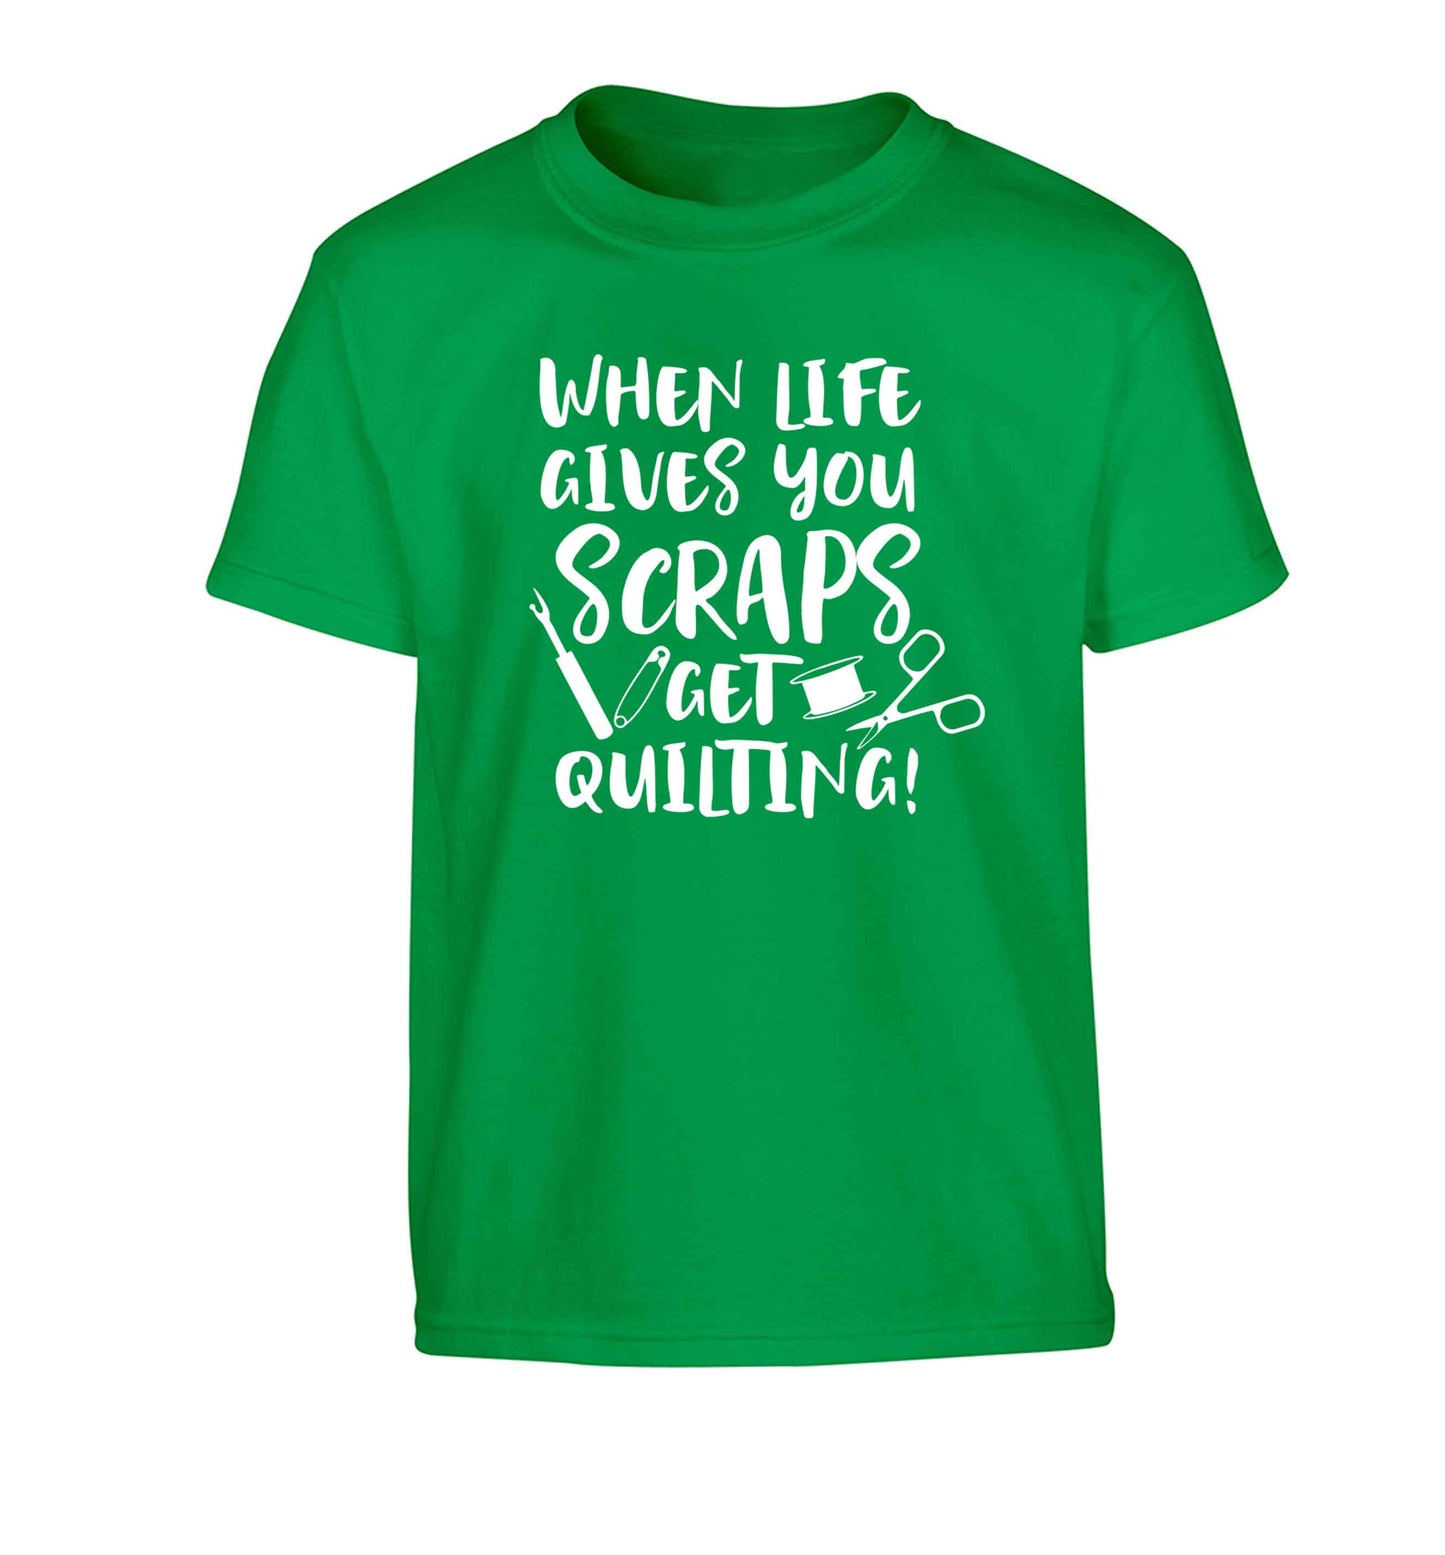 When life gives you scraps get quilting! Children's green Tshirt 12-13 Years